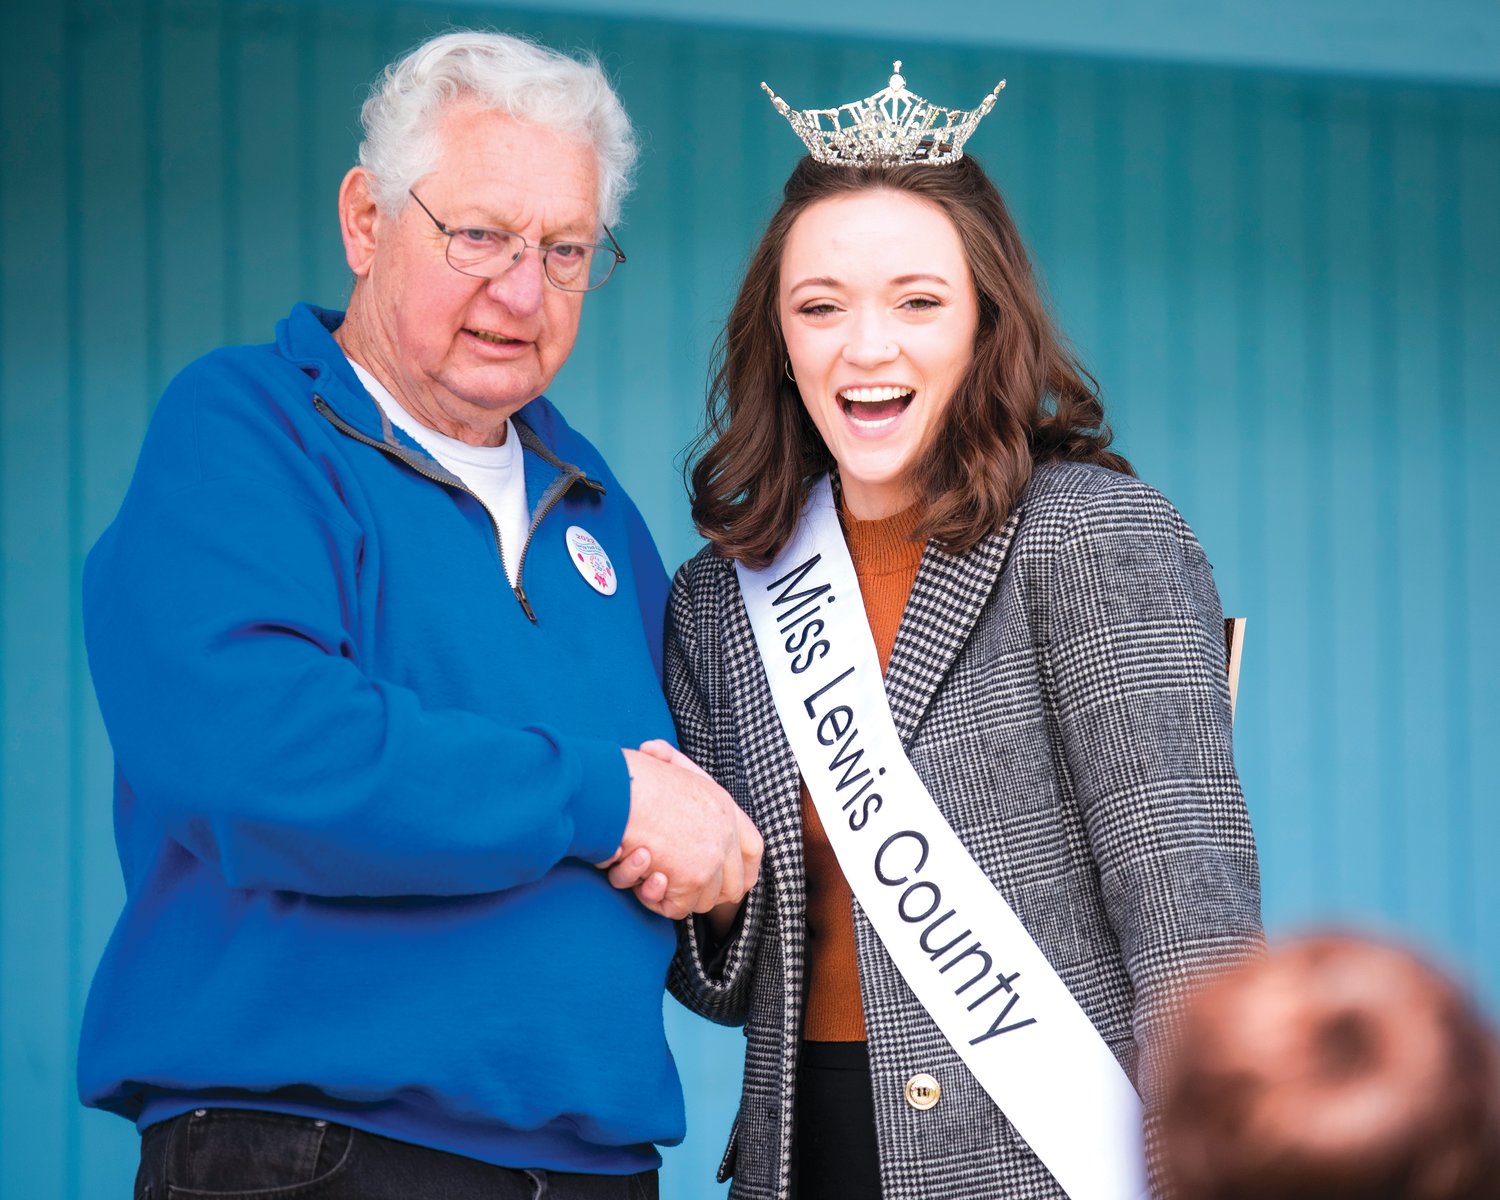 Lee Coumbs poses for a photo while shaking hands with Miss Lewis County Briana Rasku Sunday afternoon during the Spring Youth Fair in Centralia.